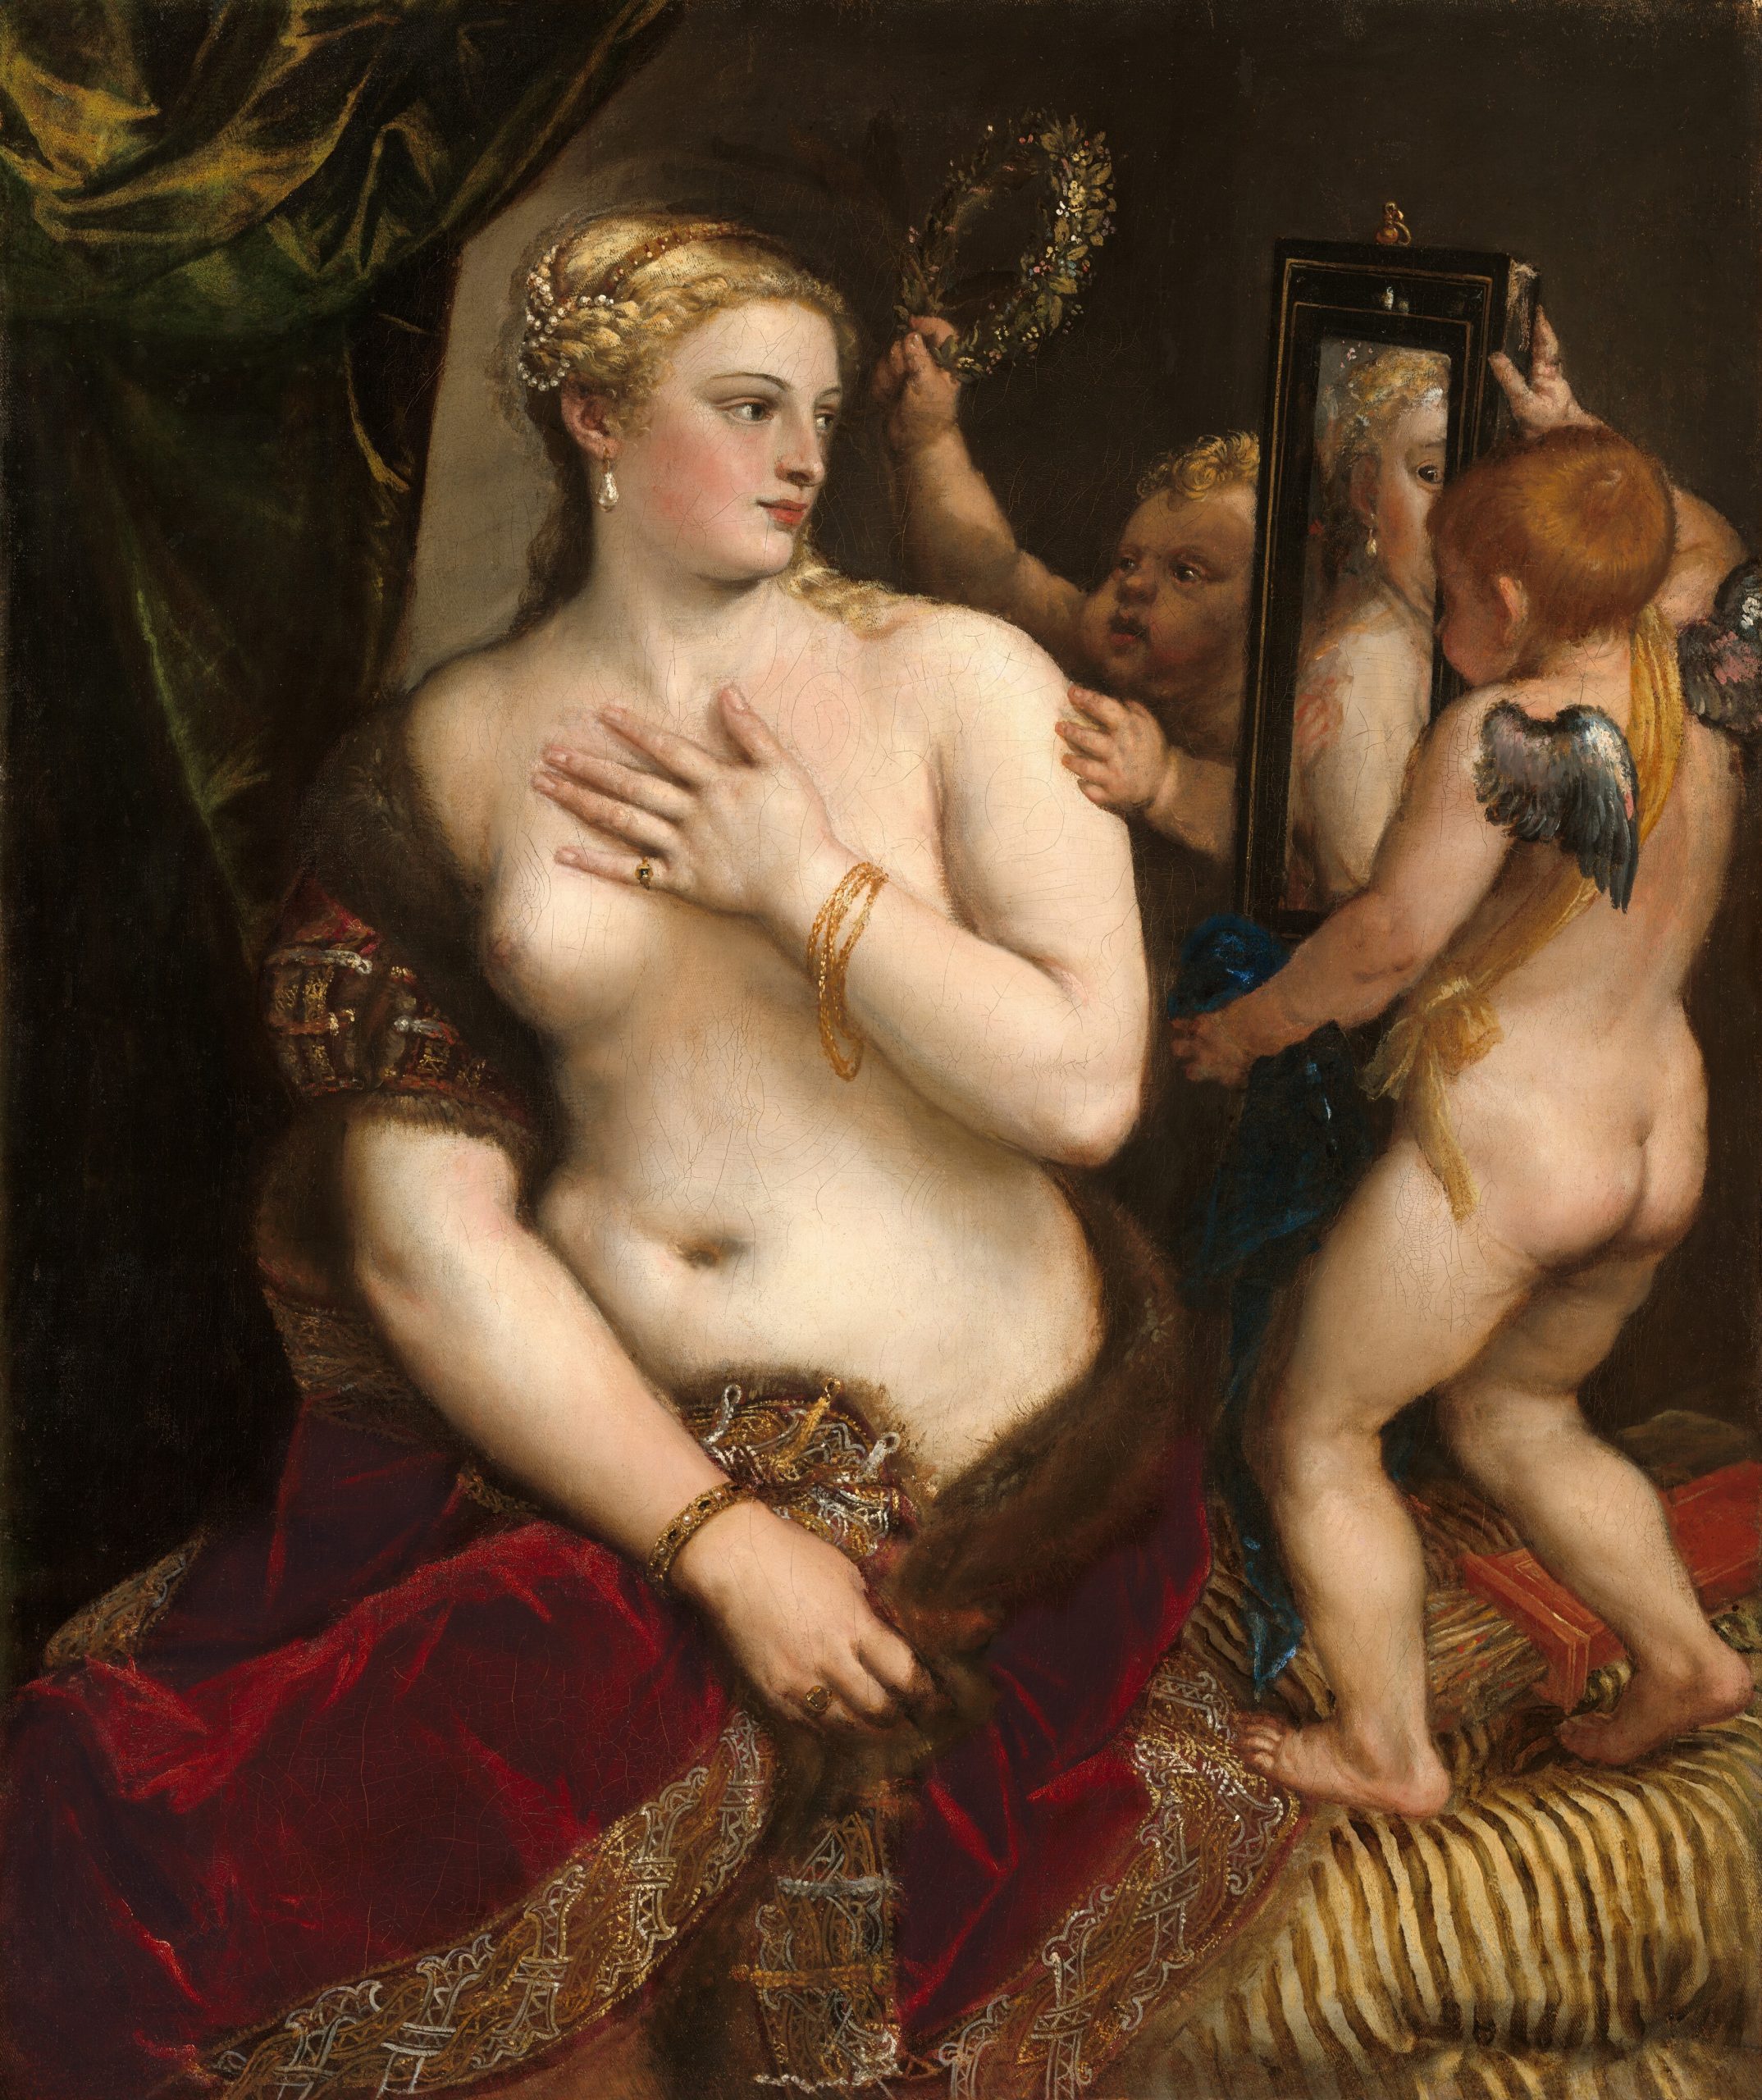 A painting of Venus staring into a mirror with cherubs.